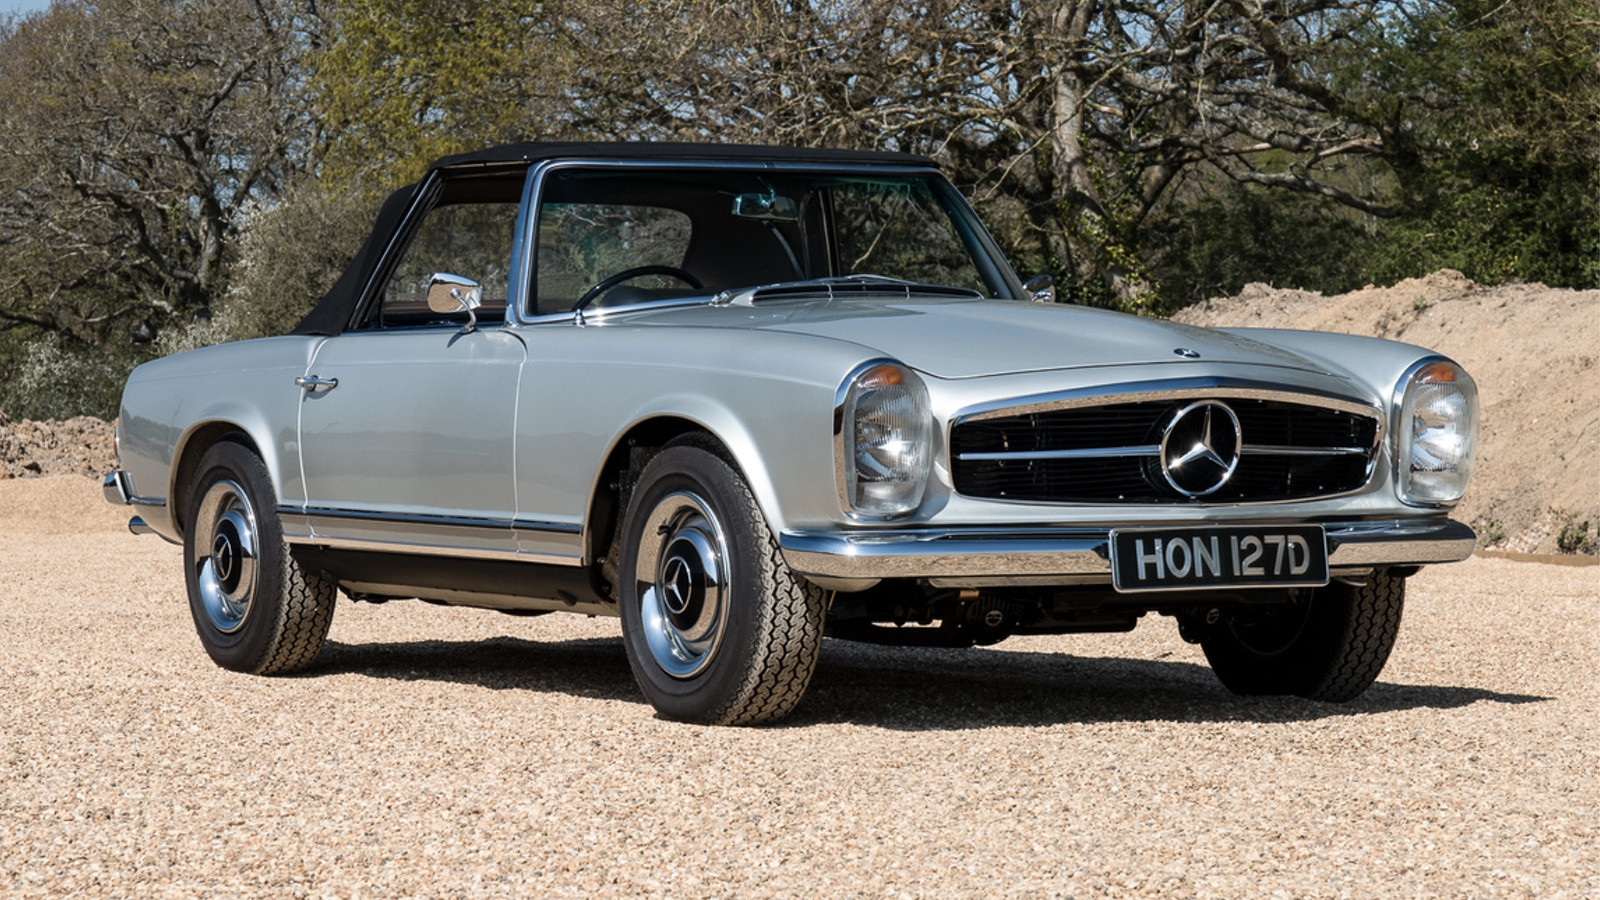 Ex-Mike Hailwood sports car leads £2.5m Silverstone auction